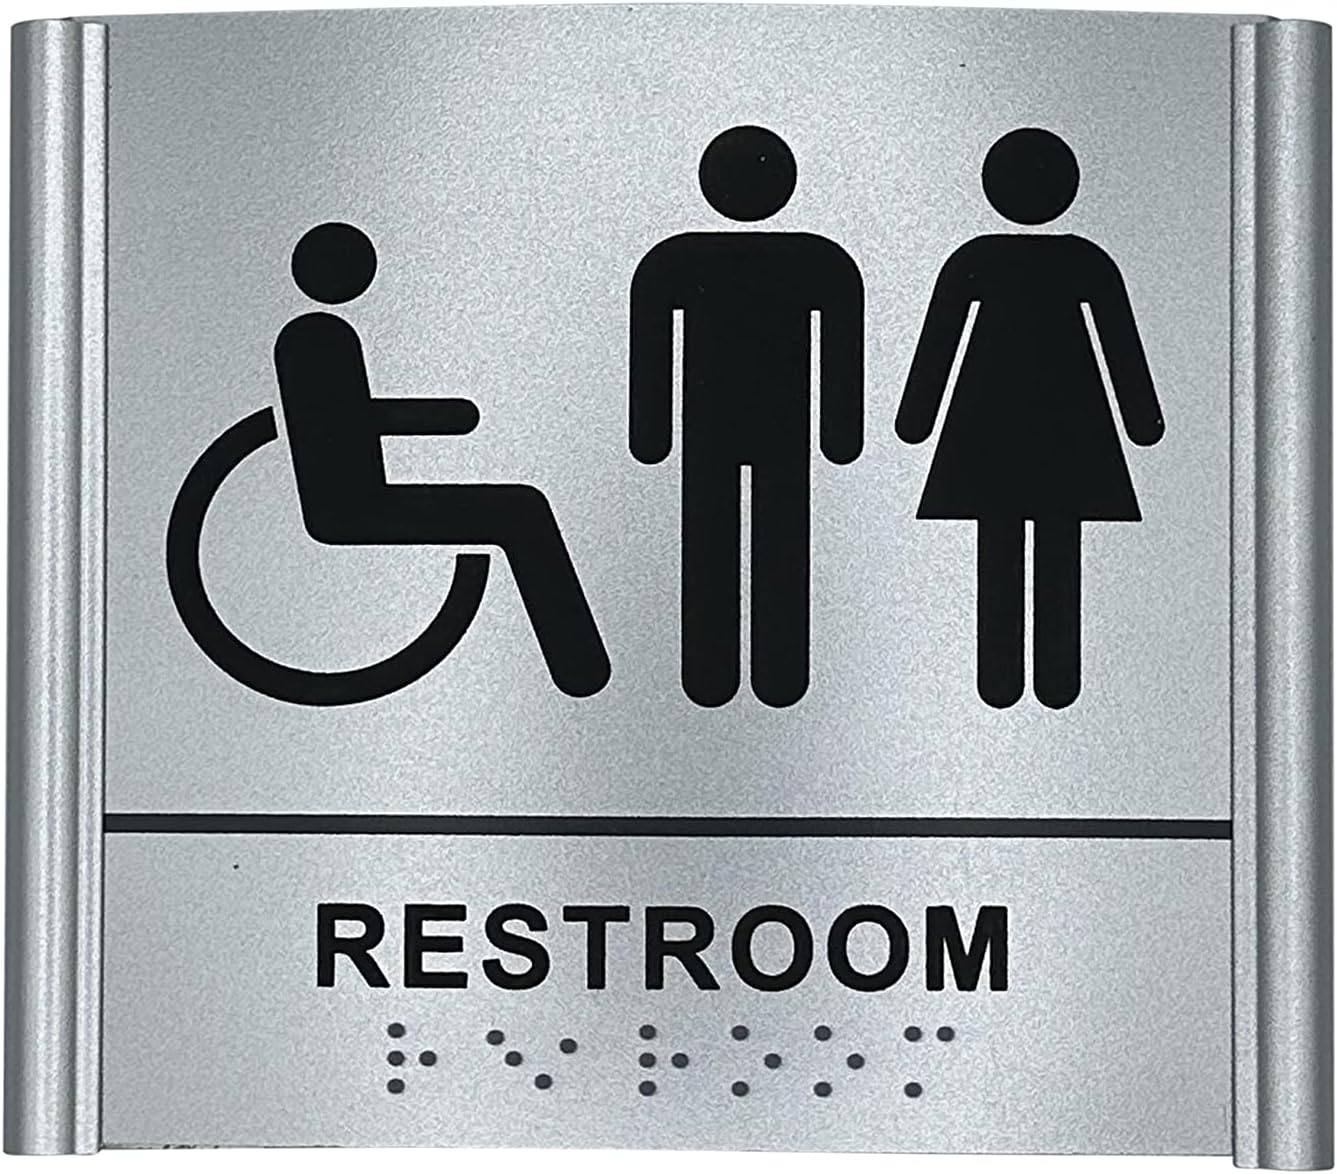 Large Aluminum 3D Restroom Sign with Braille